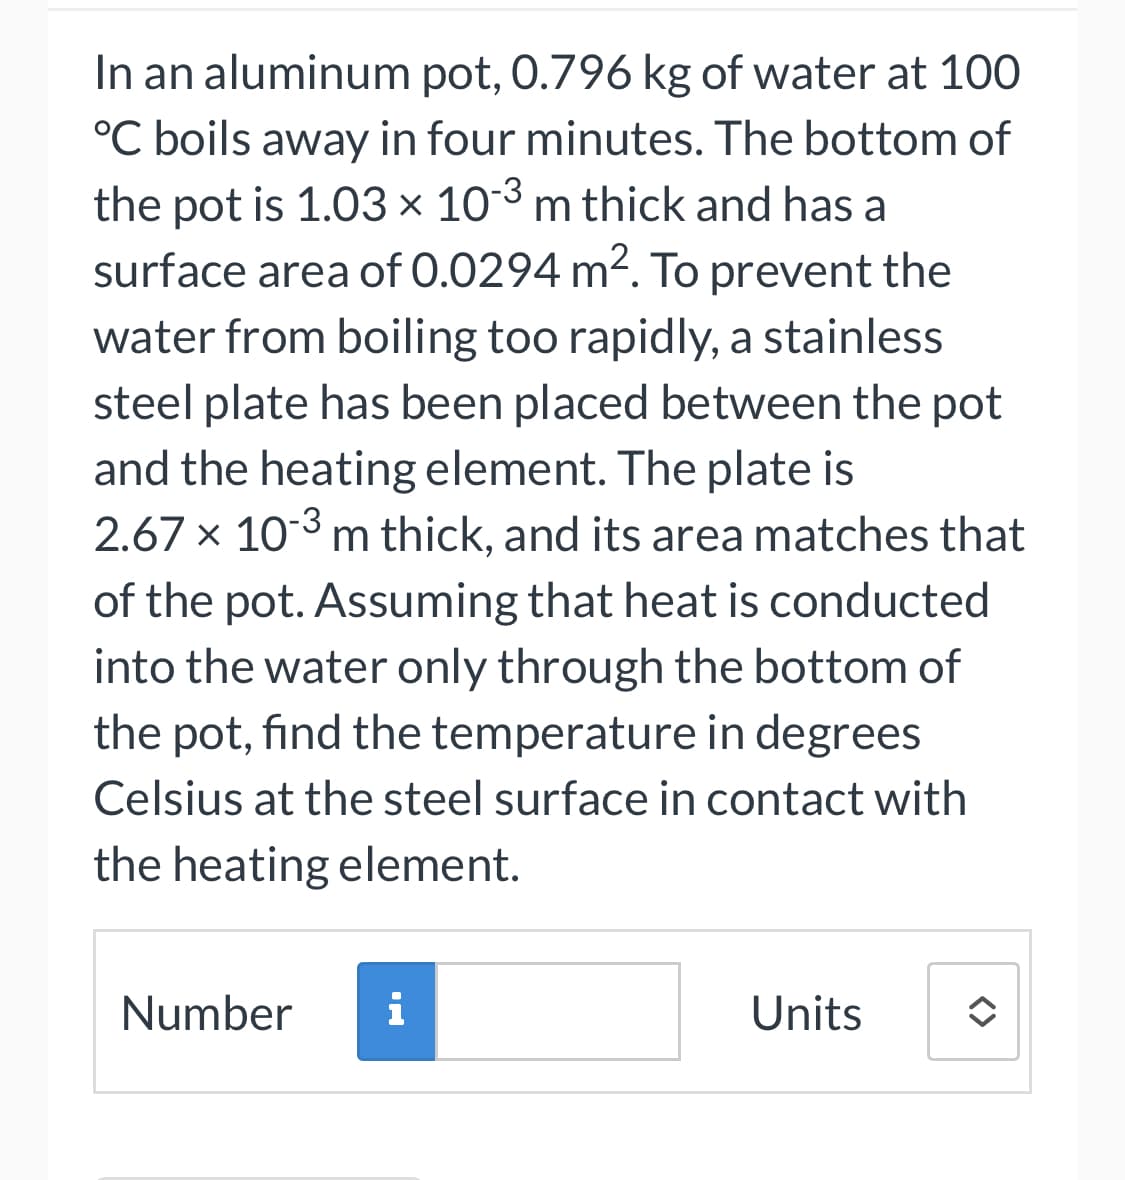 In an aluminum pot, 0.796 kg of water at 100
°C boils away in four minutes. The bottom of
the pot is 1.03 × 10-3 m thick and has a
surface area of 0.0294 m². To prevent the
water from boiling too rapidly, a stainless
steel plate has been placed between the pot
and the heating element. The plate is
2.67 x 10-3 m thick, and its area matches that
of the pot. Assuming that heat is conducted
into the water only through the bottom of
the pot, find the temperature in degrees
Celsius at the steel surface in contact with
the heating element.
Number
i
Units
<>